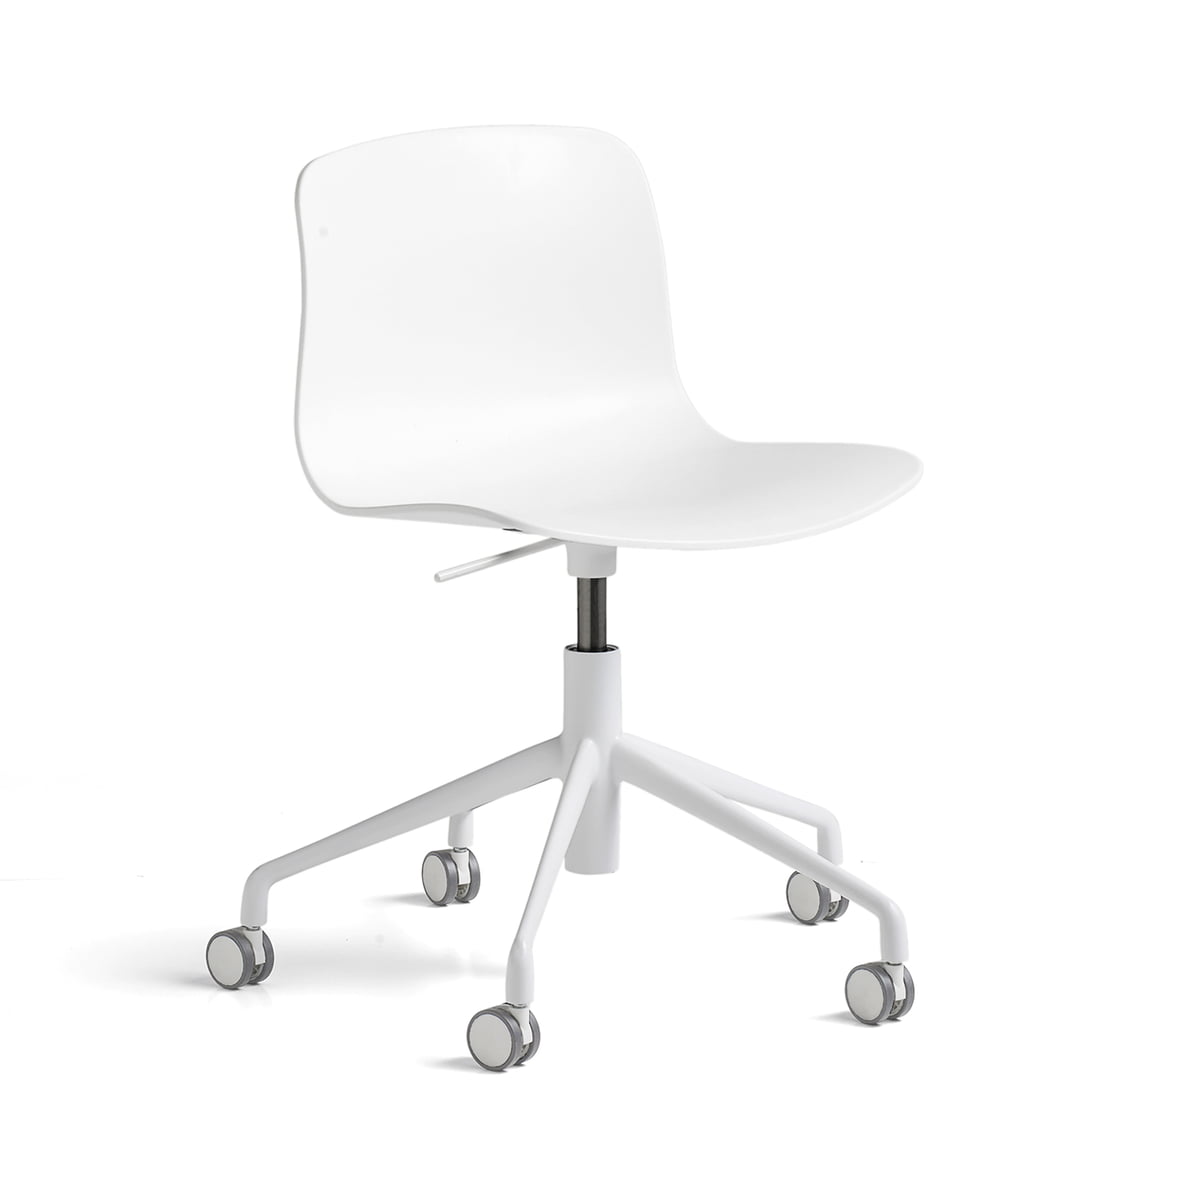 Hay - About A Chair AAC 50 with gas lift, aluminum white / white 2. 0